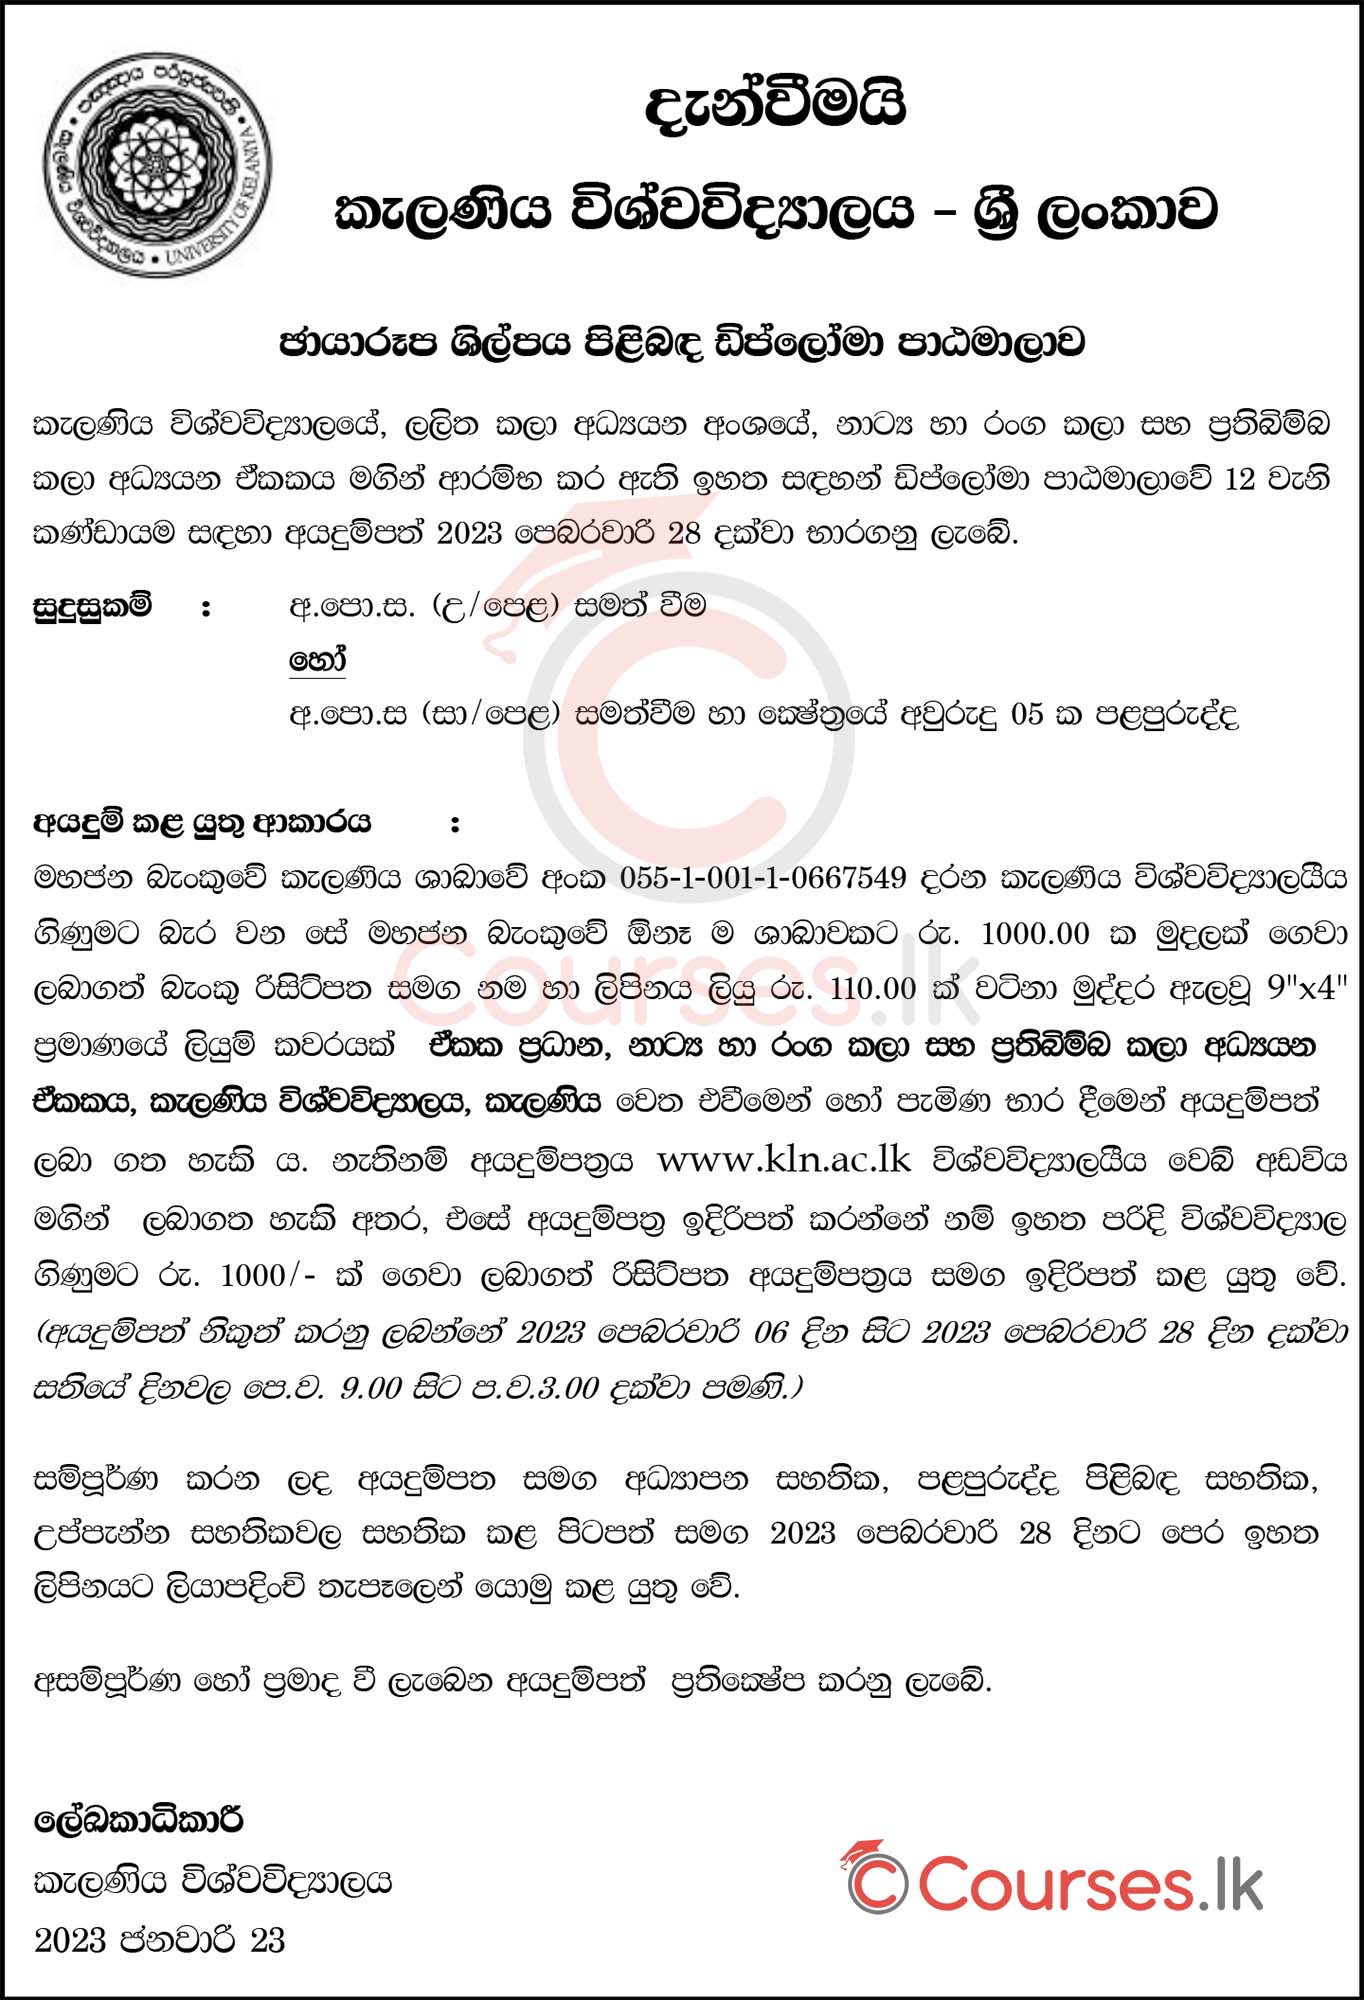 Call for Applications - Diploma Course in Photography (2023) from the University of Kelaniya